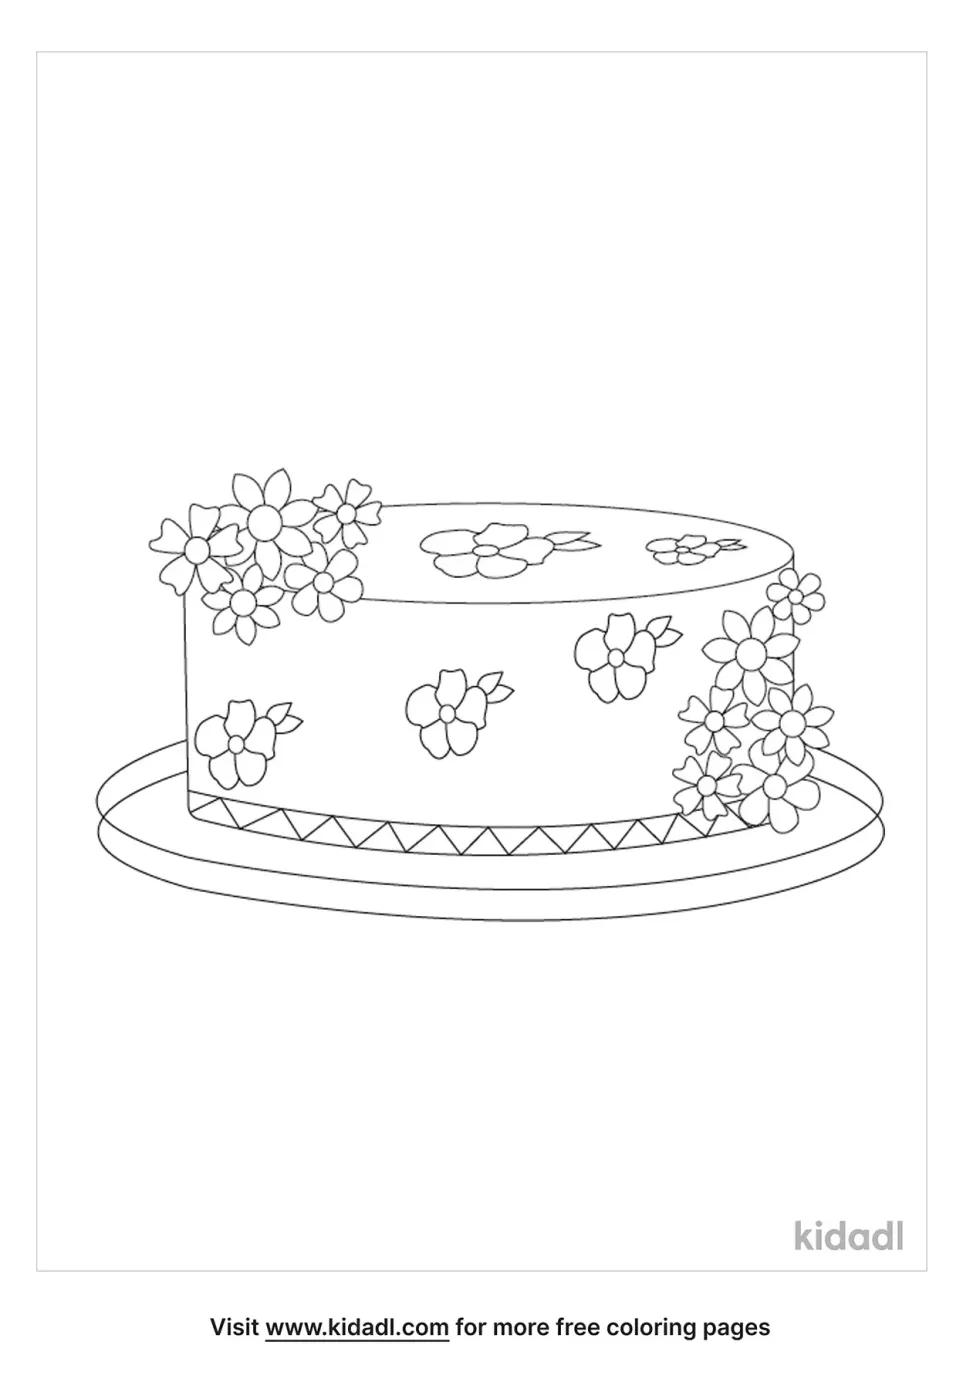 Floral Cakes Coloring Page